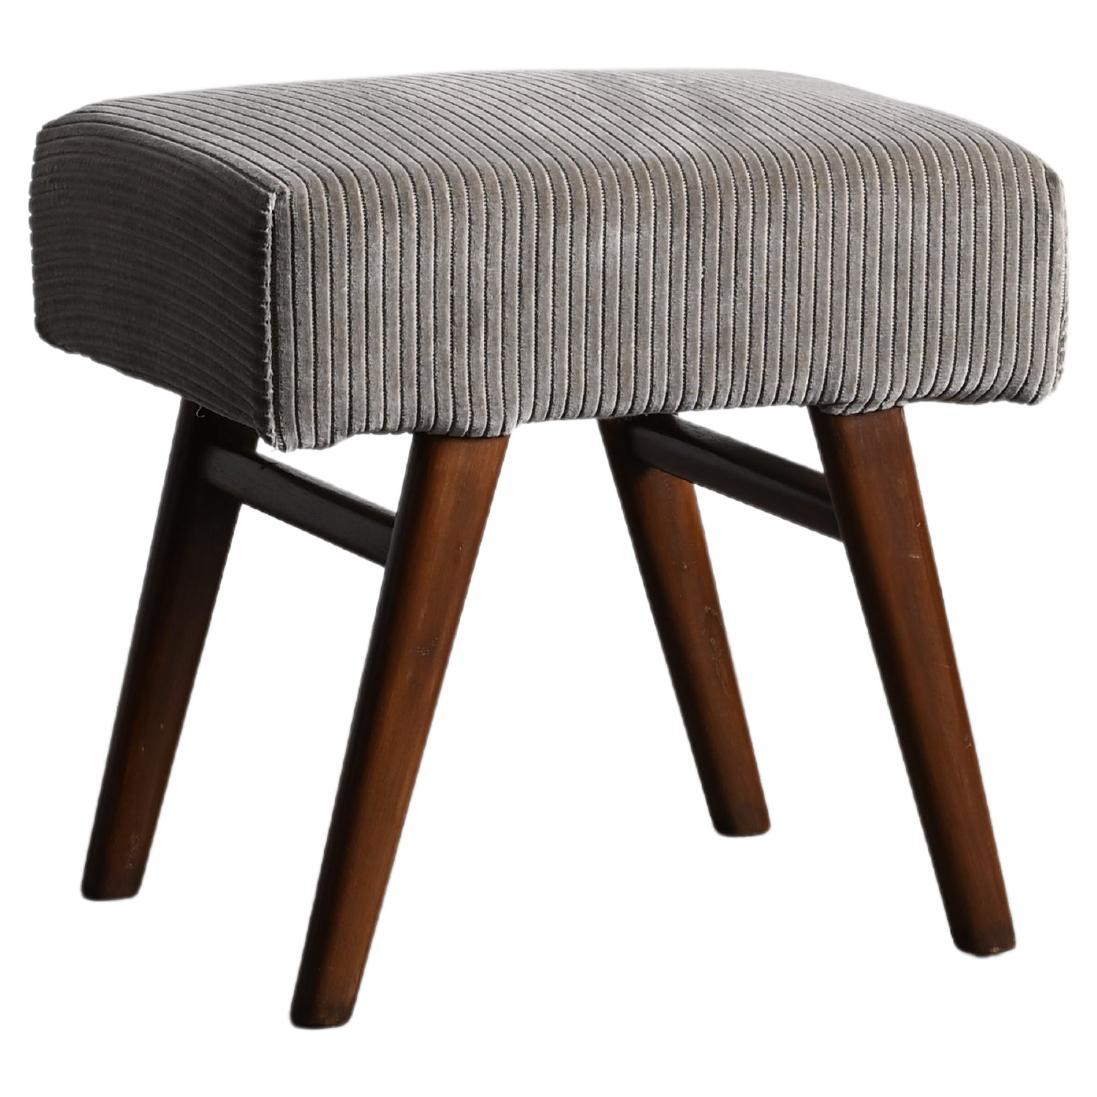 Pierre Jeanneret PJ-SI-40-B Low Upholstered Stool / Authentic Mid-Century Modern